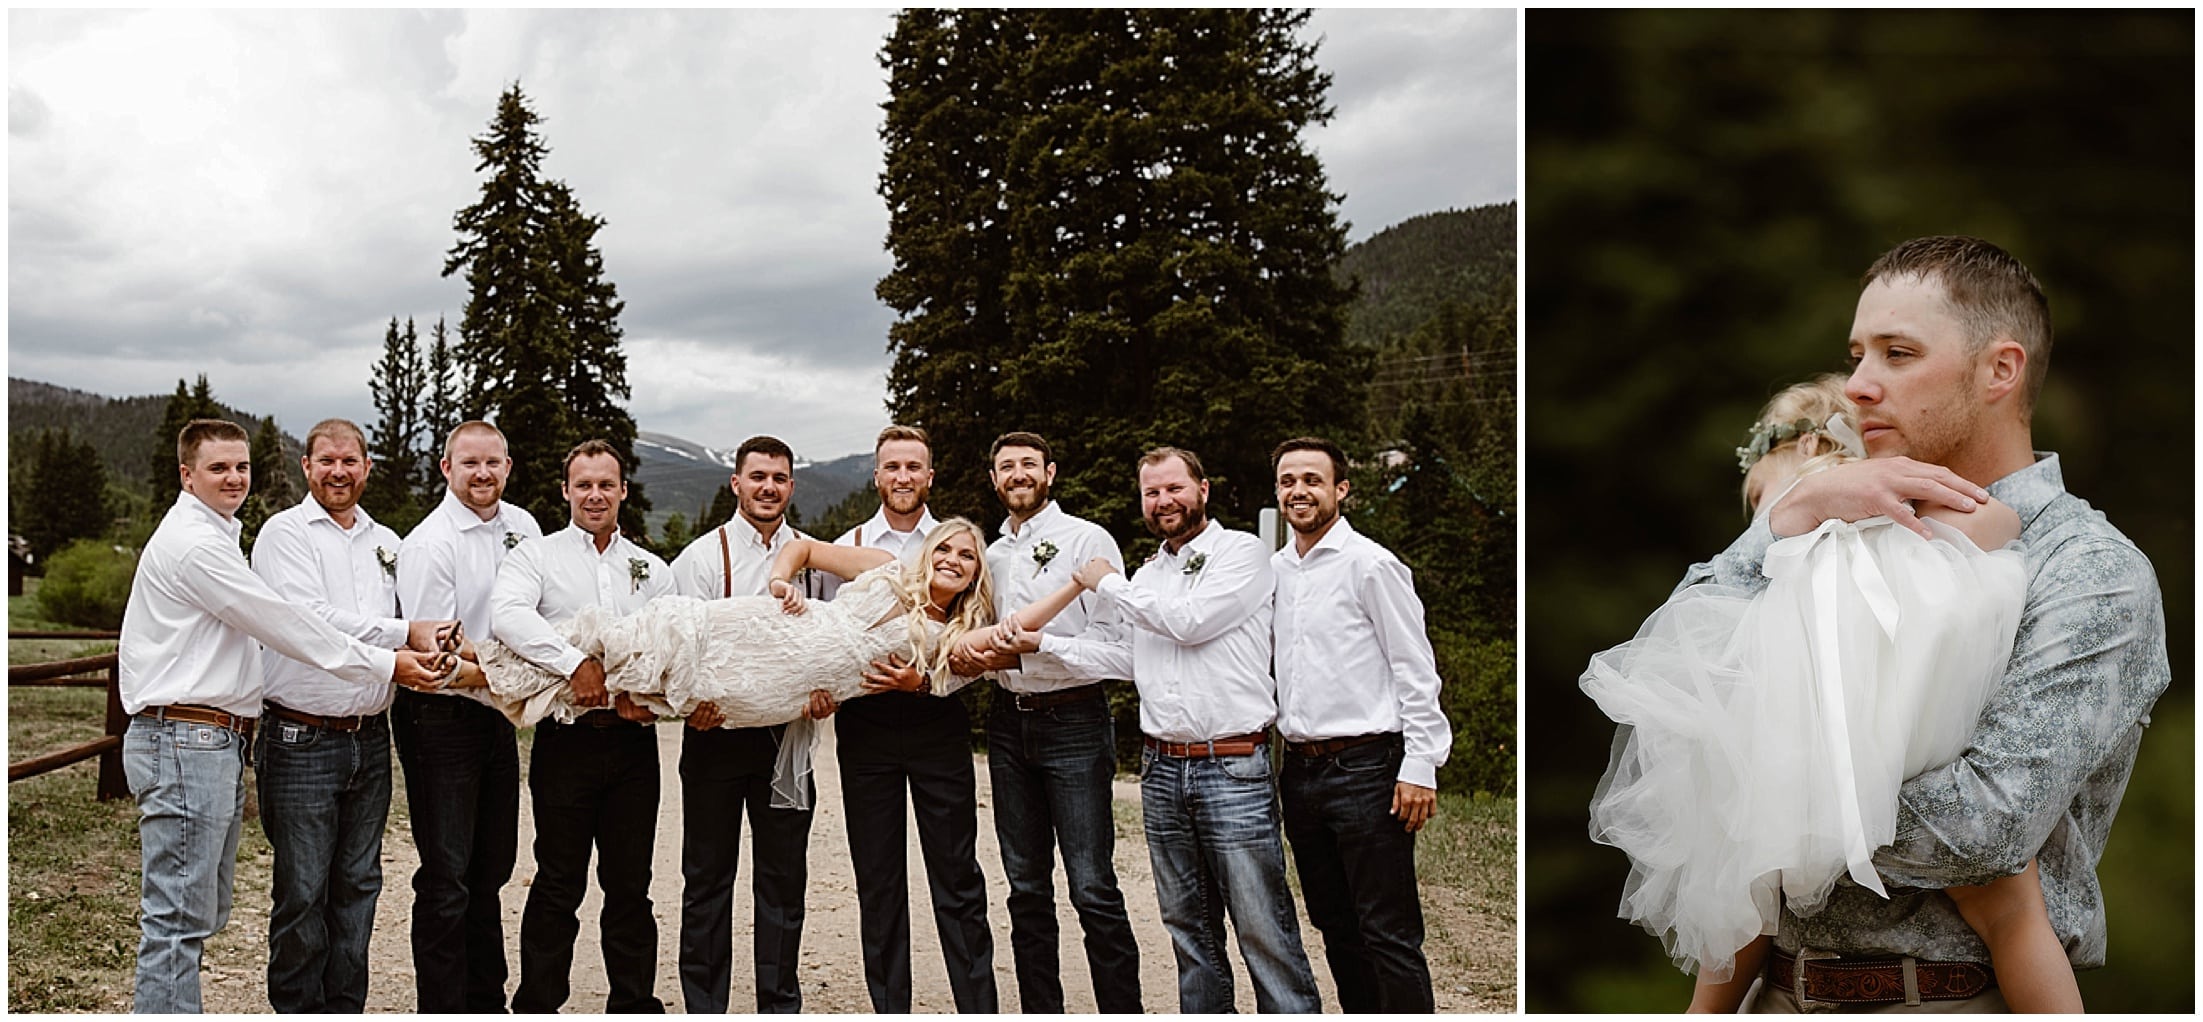 groomsmen in the mountains, Aspen Lodge, Red River New Mexico, Red River New Mexico Wedding, Weddings in New Mexico, Destination mountain wedding, destination mountain elopement, elopements in new mexico, places to get married in new mexico, destination elopement photographer, mountain wedding photographer, new mexico wedding photographer, new mexico elopement photographer, brit nicole photography, cabin wedding, new mexico cabin wedding, mountain landscape for wedding, small intimate mountain wedding, small intimate river wedding, wedding photographer in new mexico, junebug weddings, the knot, wedding wire, 41 productions with lindsay gomez, dallas texas bride, DJ Allen Gallegos, Tao Cakes, New Mexico Wedding planner karen kelly, barnes jewelry, Lillian West bridal dress, Lang’s Bridal, enchanted florist wedding flowers, places to get married in texas, texas wedding photographer, texas elopement photographer, forest wedding, forest elopement, wooded area for wedding, wooded elopement, elopement in the woods, amarillo wedding photographer, amarillo elopement photographer